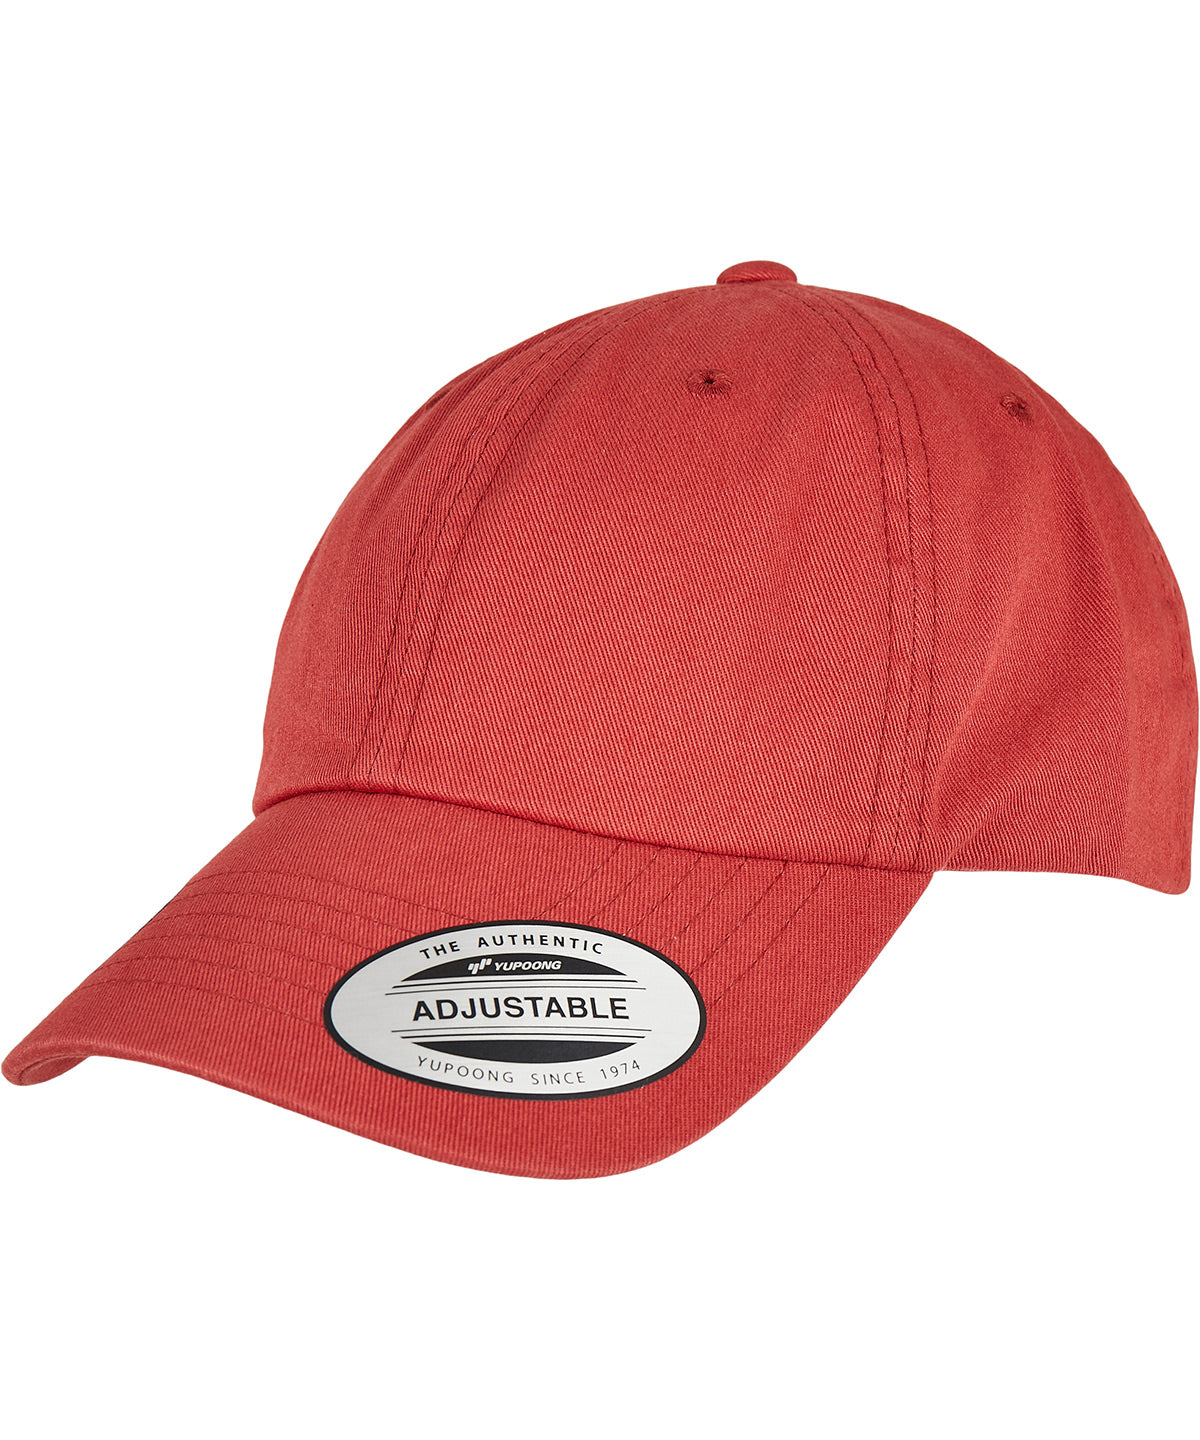 Personalised Caps - Light Red Flexfit by Yupoong Eco-wash dad cap (6245EC)